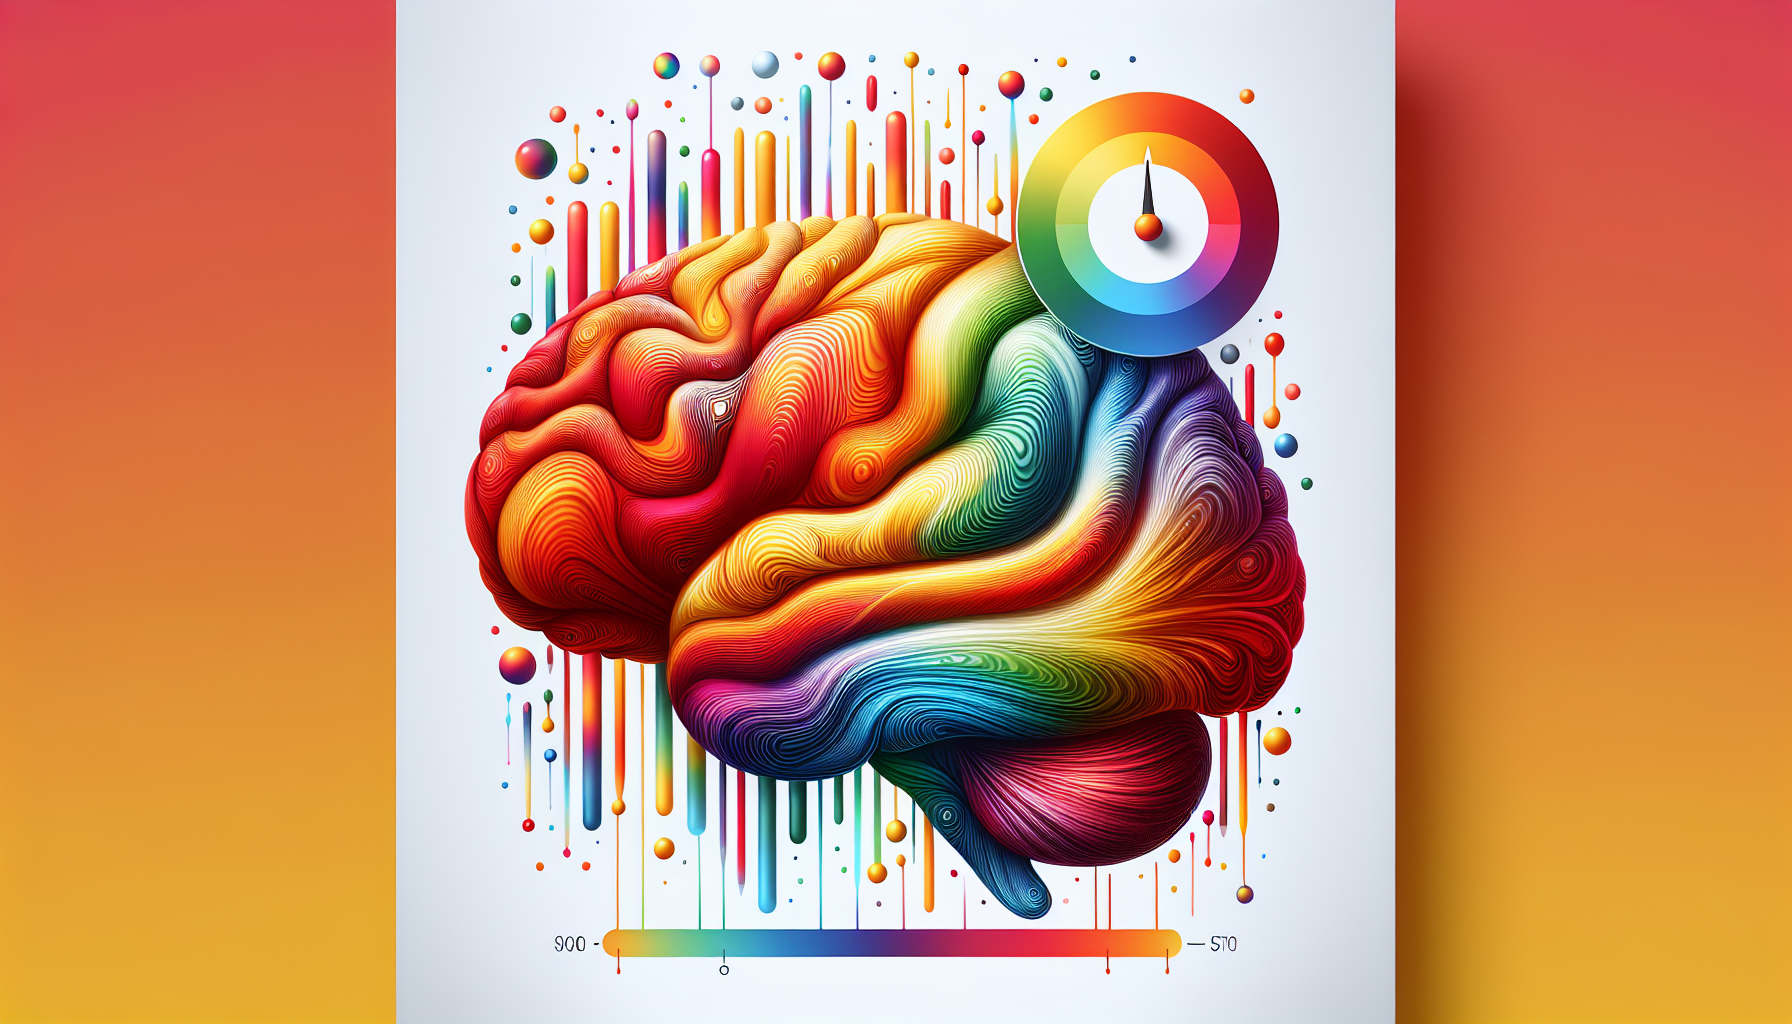 A brain with various emotions represented as different colored areas, with a stress meter on the sid